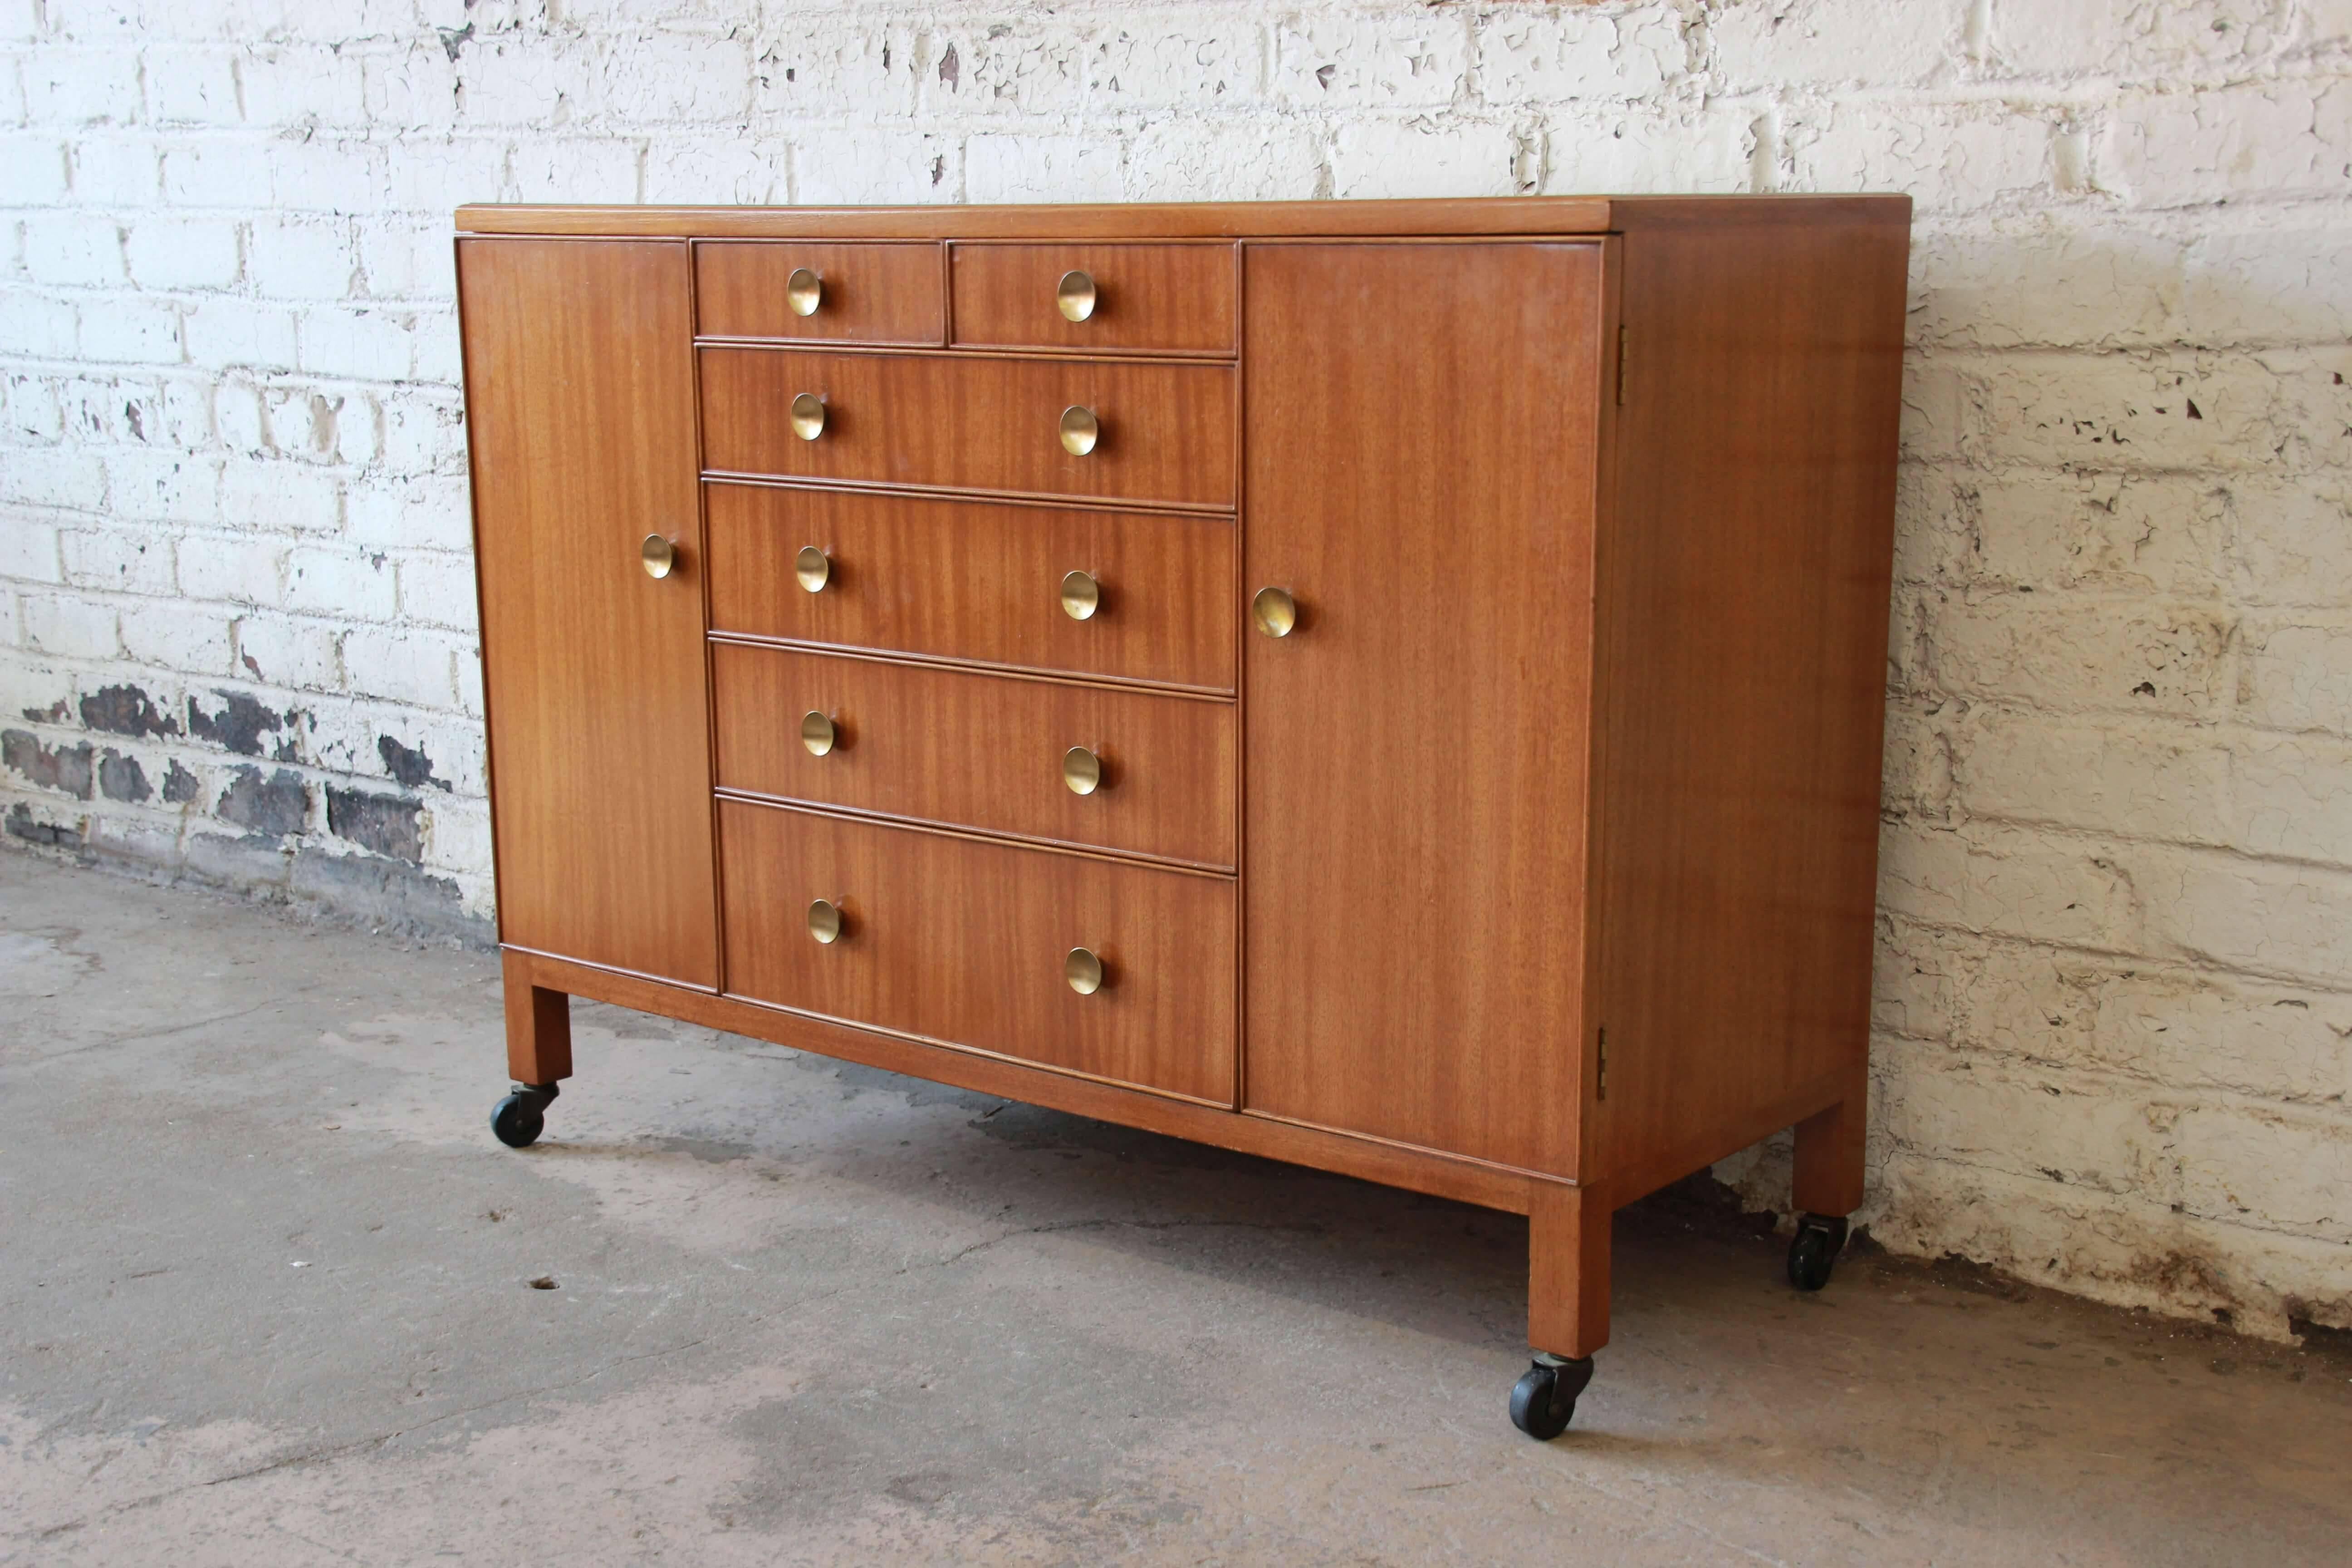 Offering an exceptional early Edward Wormley for Dunbar long dresser. This piece has its original brass circular pulls and an inset glass top. The dresser is made from solid mahogany and features six drawers and two cabinets. Behind each cabinet are